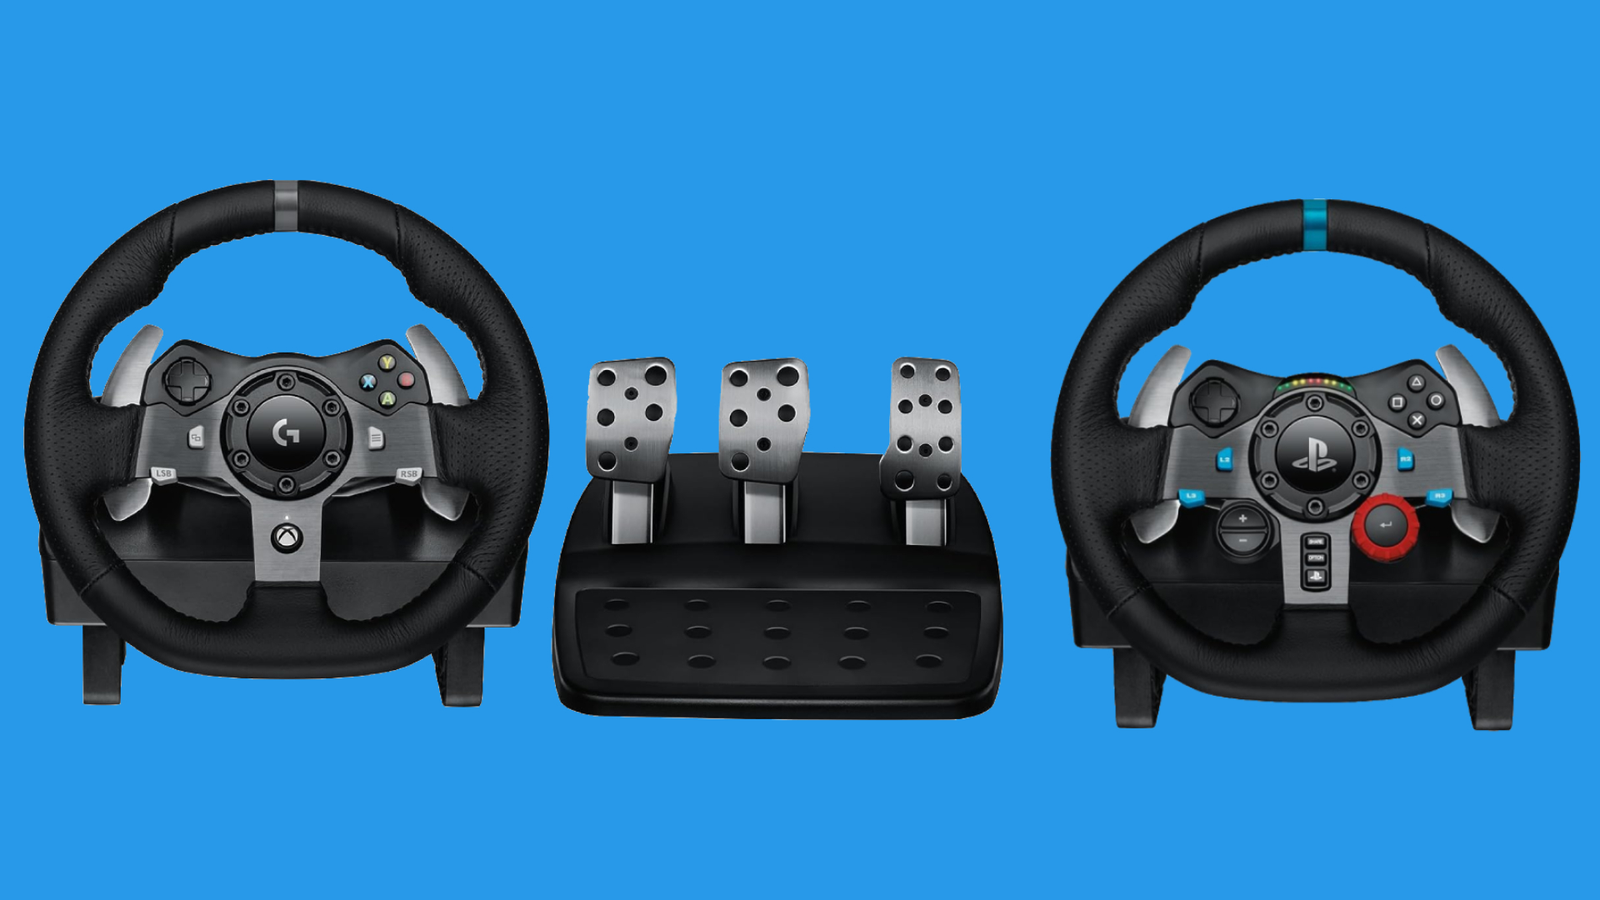 Are the Logitech G29 and G920 Still Worth it in 2021? (REVIEW) — Reviews